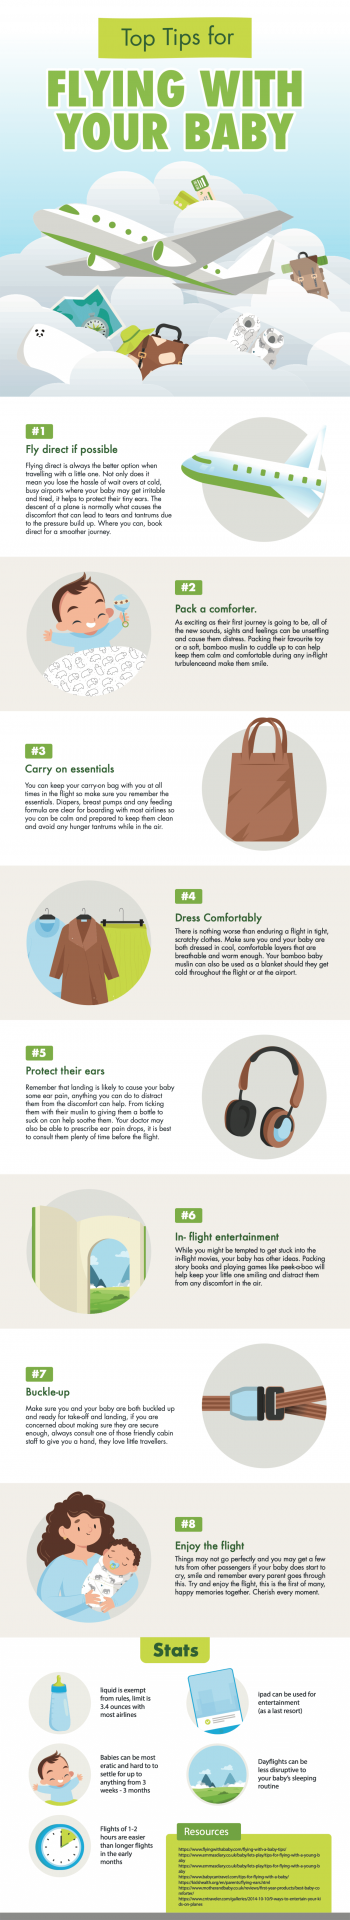 infographic top tips for flying with your baby